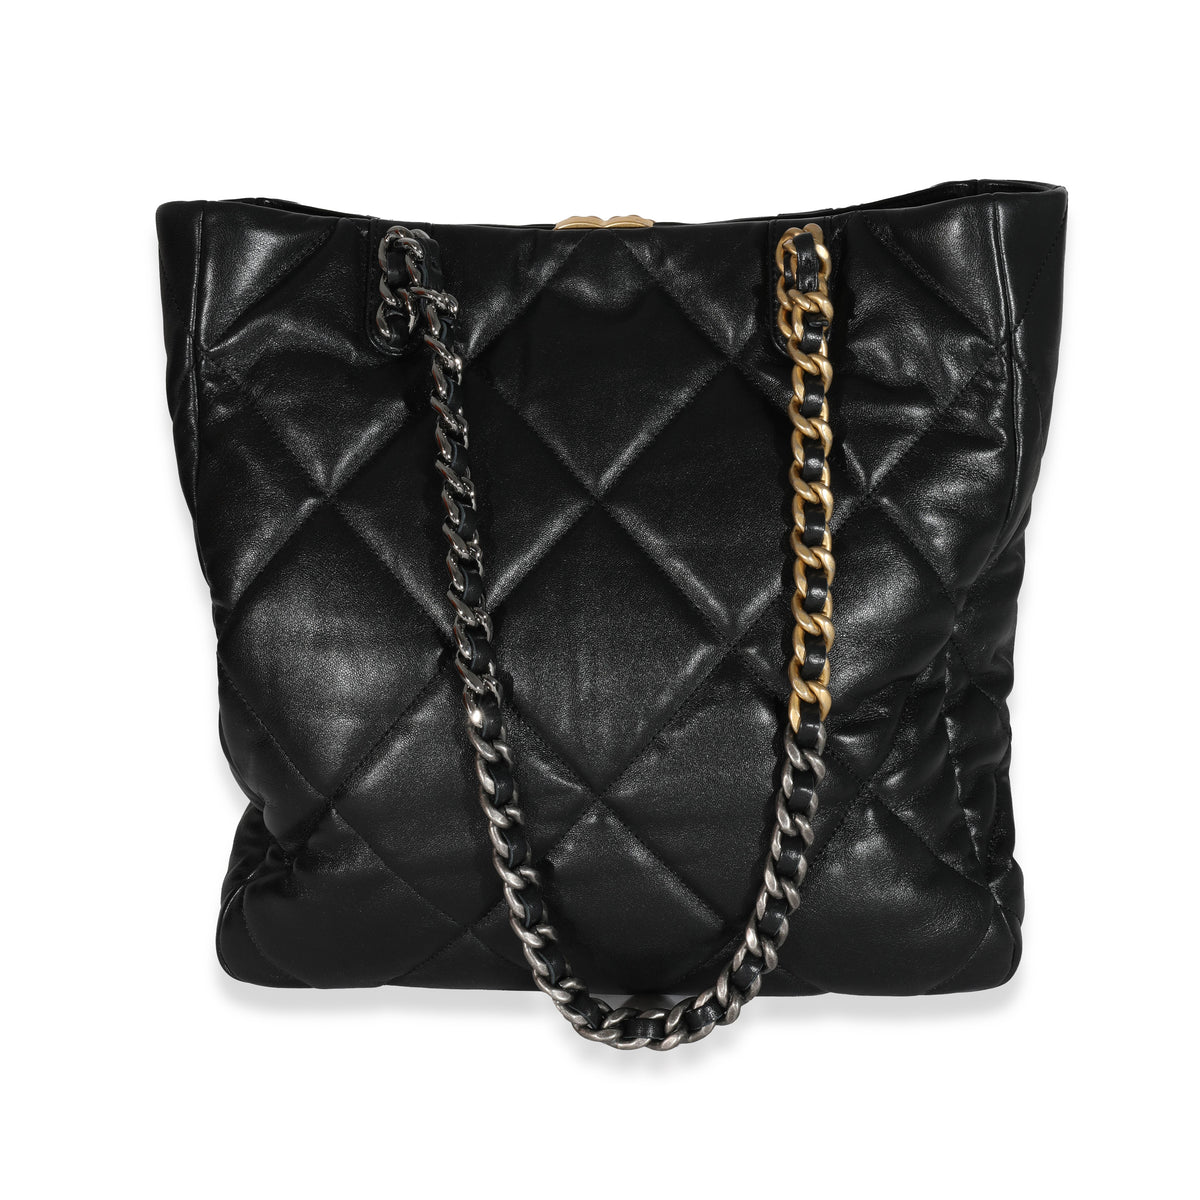 CHANEL Lambskin Quilted Chanel 19 East West Shopping Bag Black